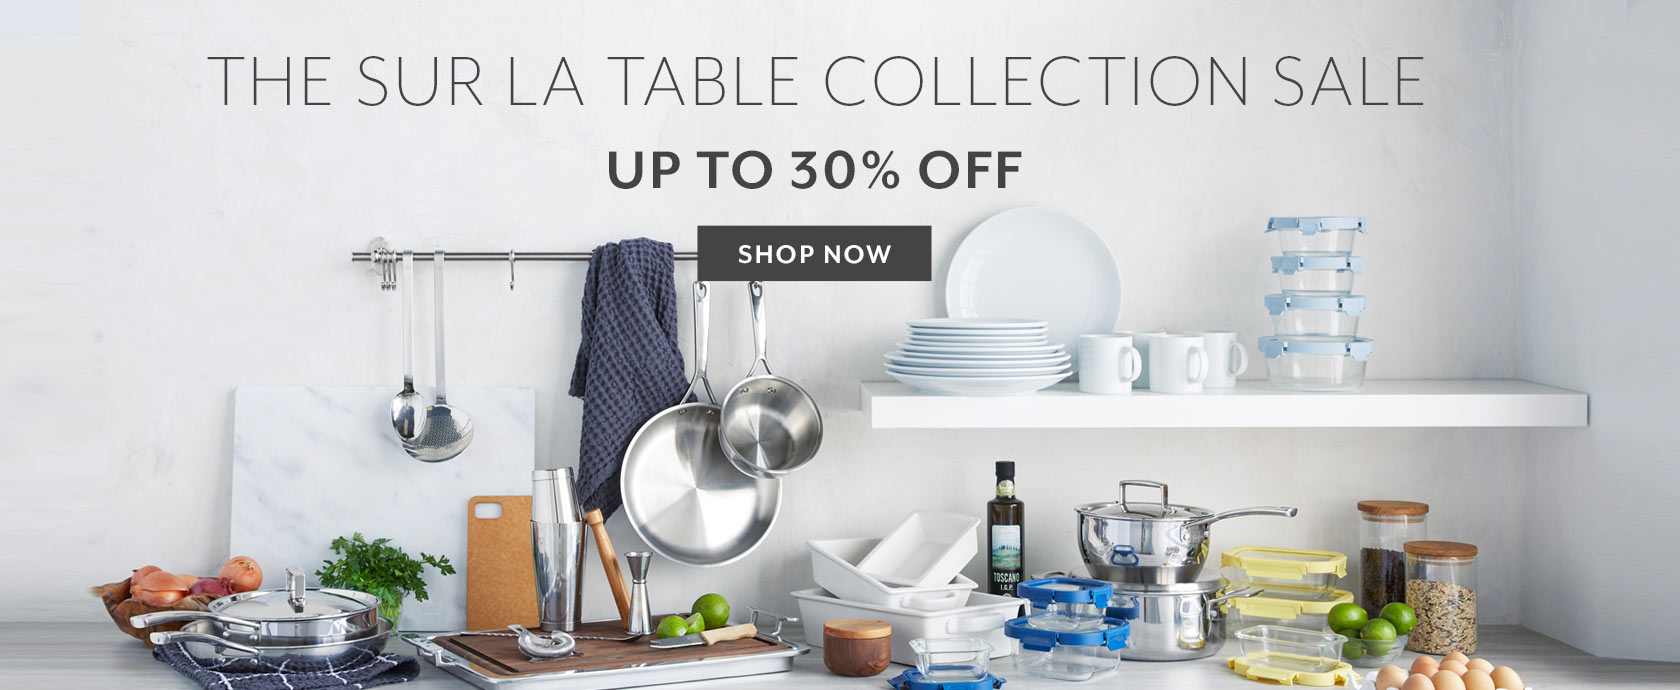 The Sur La Table Collection Sale up to 30% off